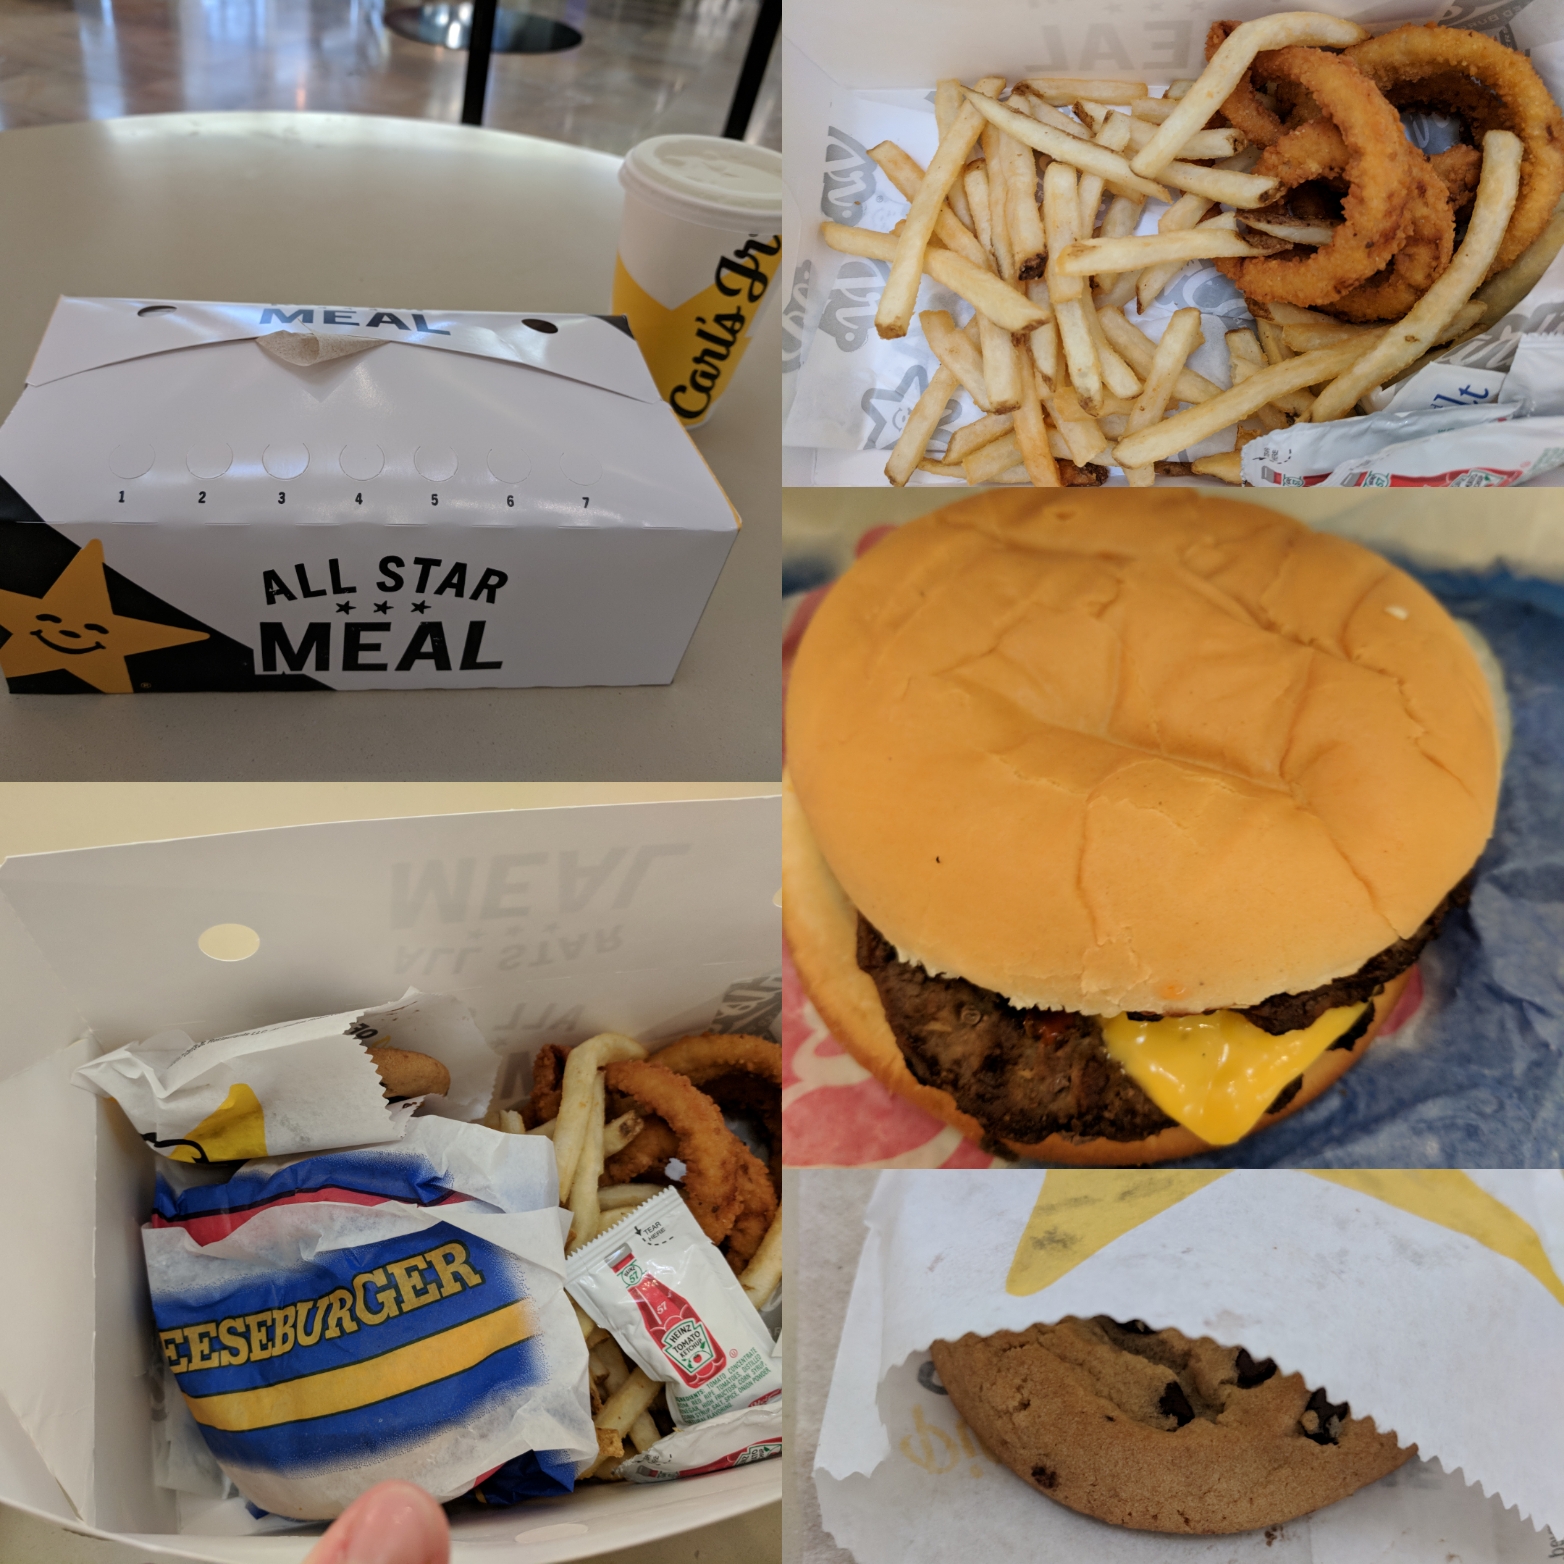 5 All Star Meal from Carl's Jr. Julie's Dining Club